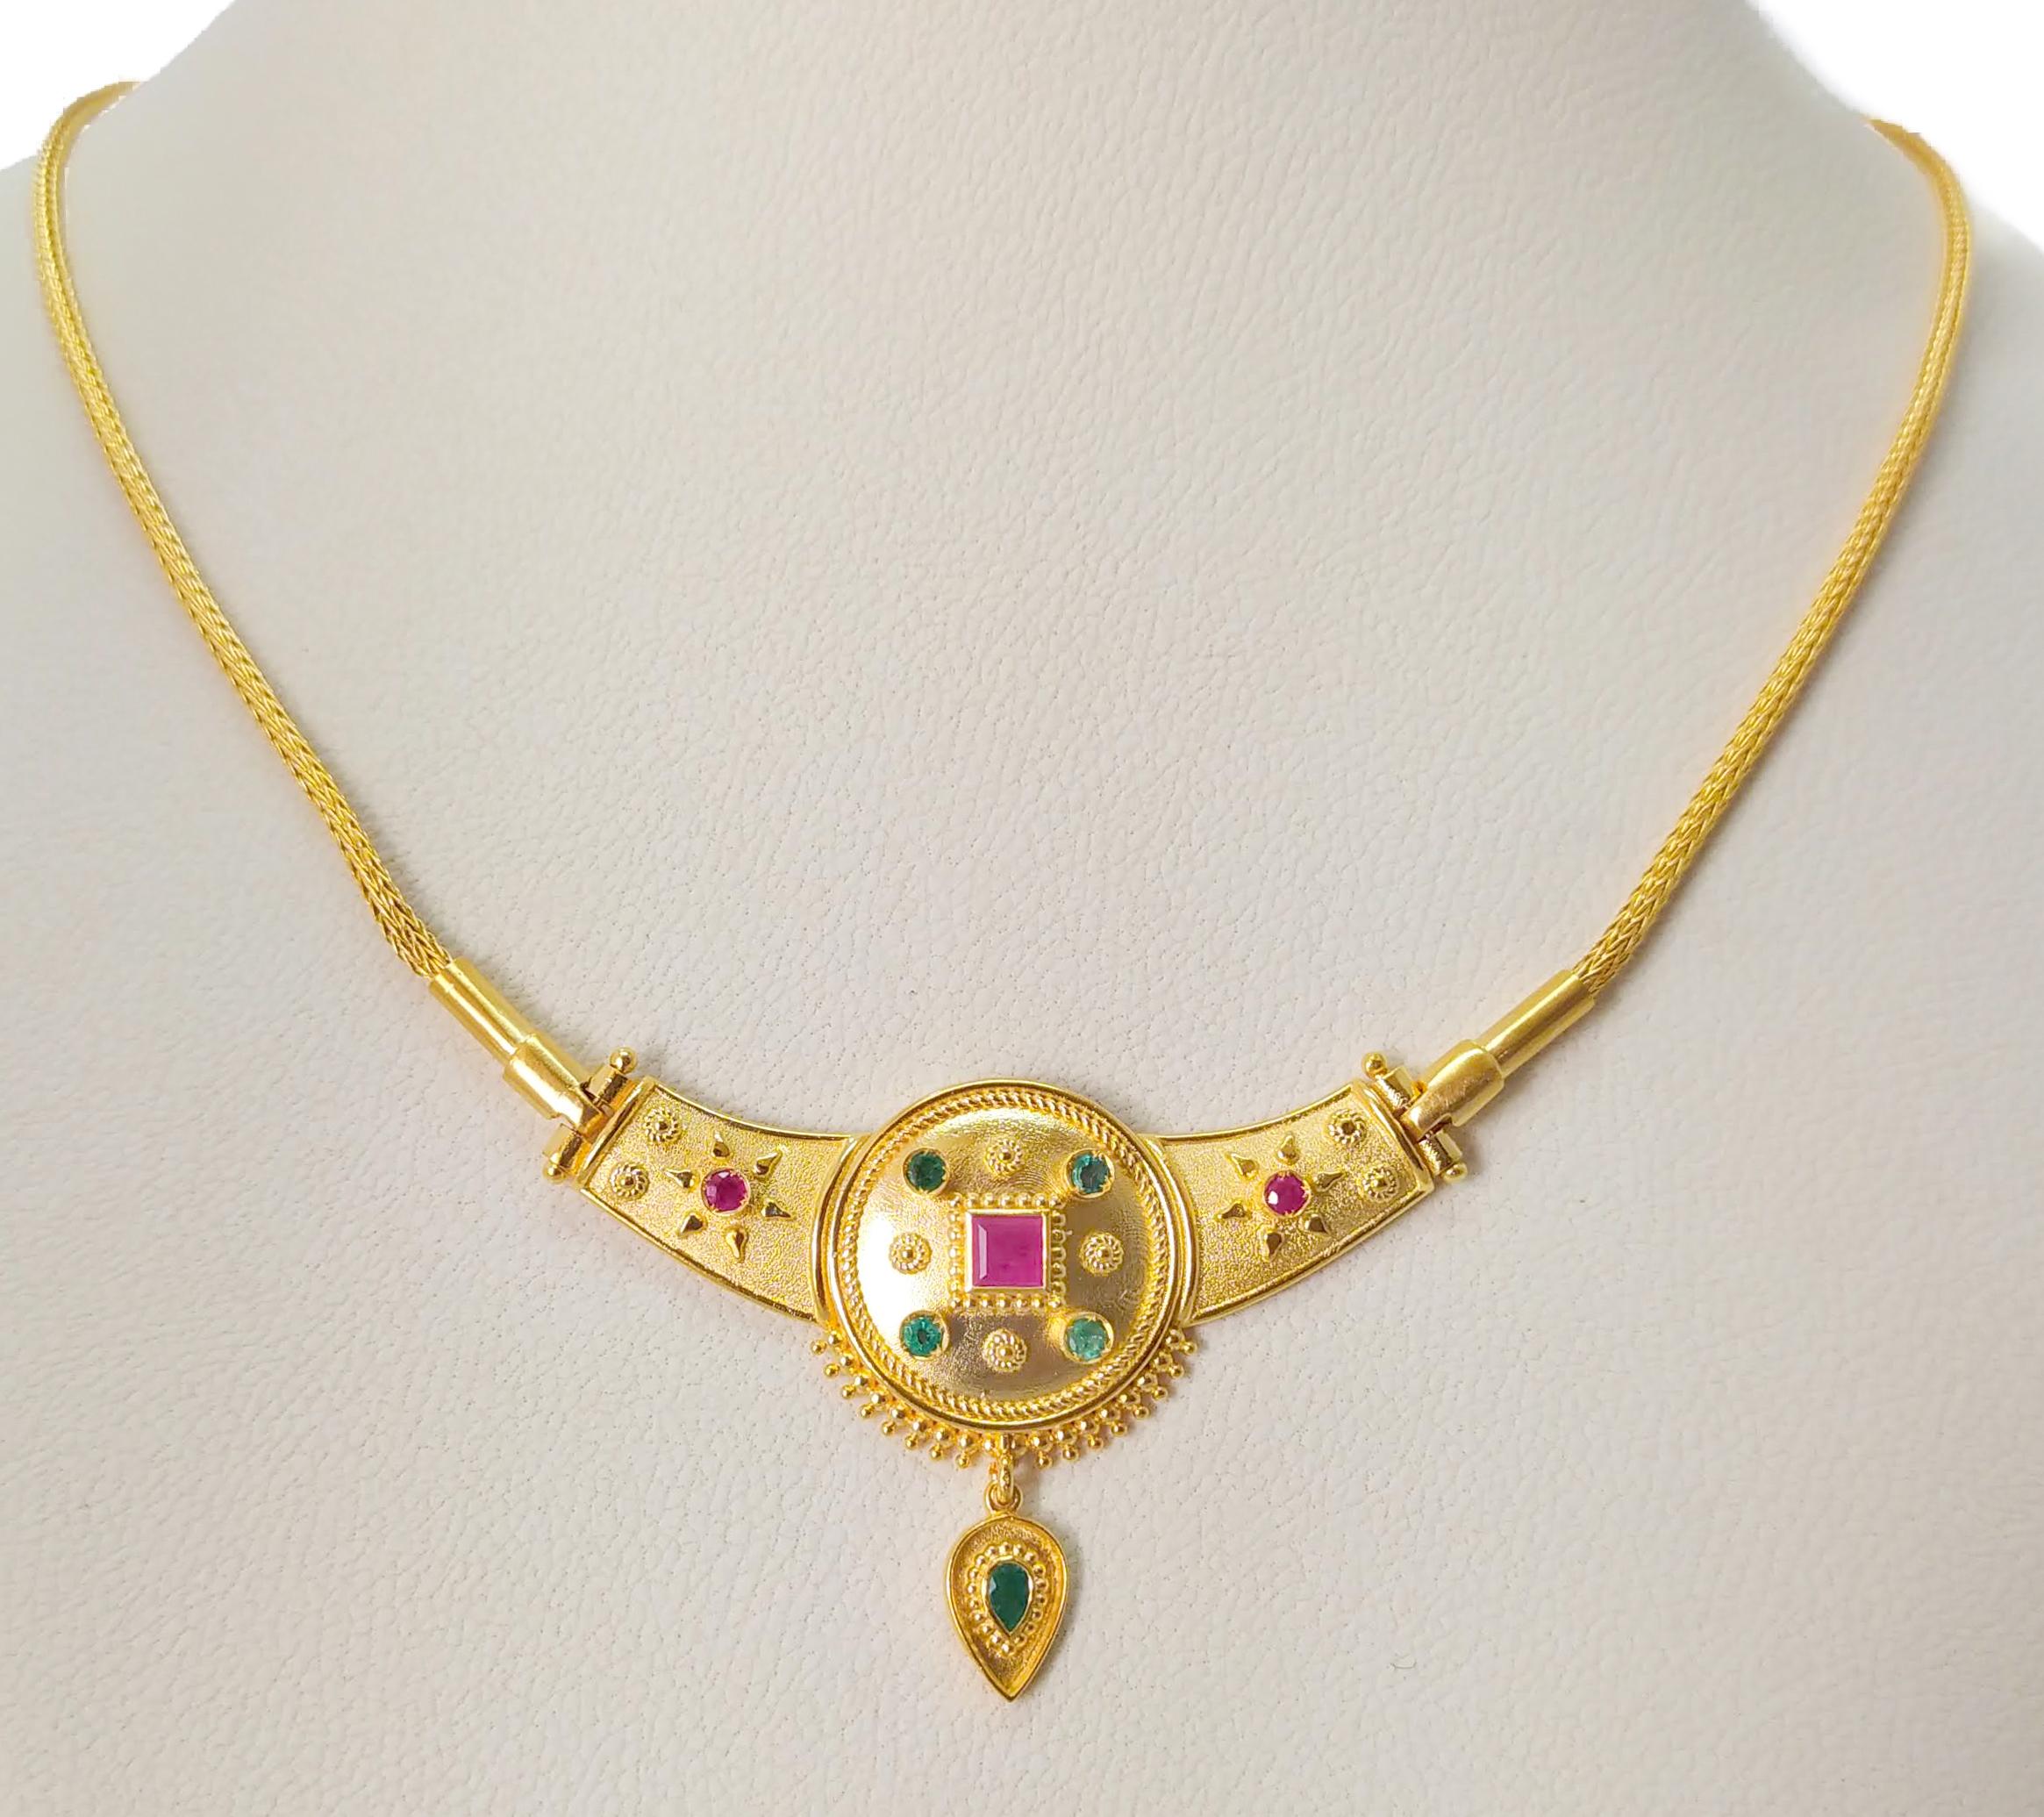 This S.Georgios designer Necklace is an 18 Karat Yellow Gold drop pendant Necklace all microscopically decorated with Byzantine bead and wire granulation work and finished with a unique velvet background look. This gorgeous Necklace showcases 3